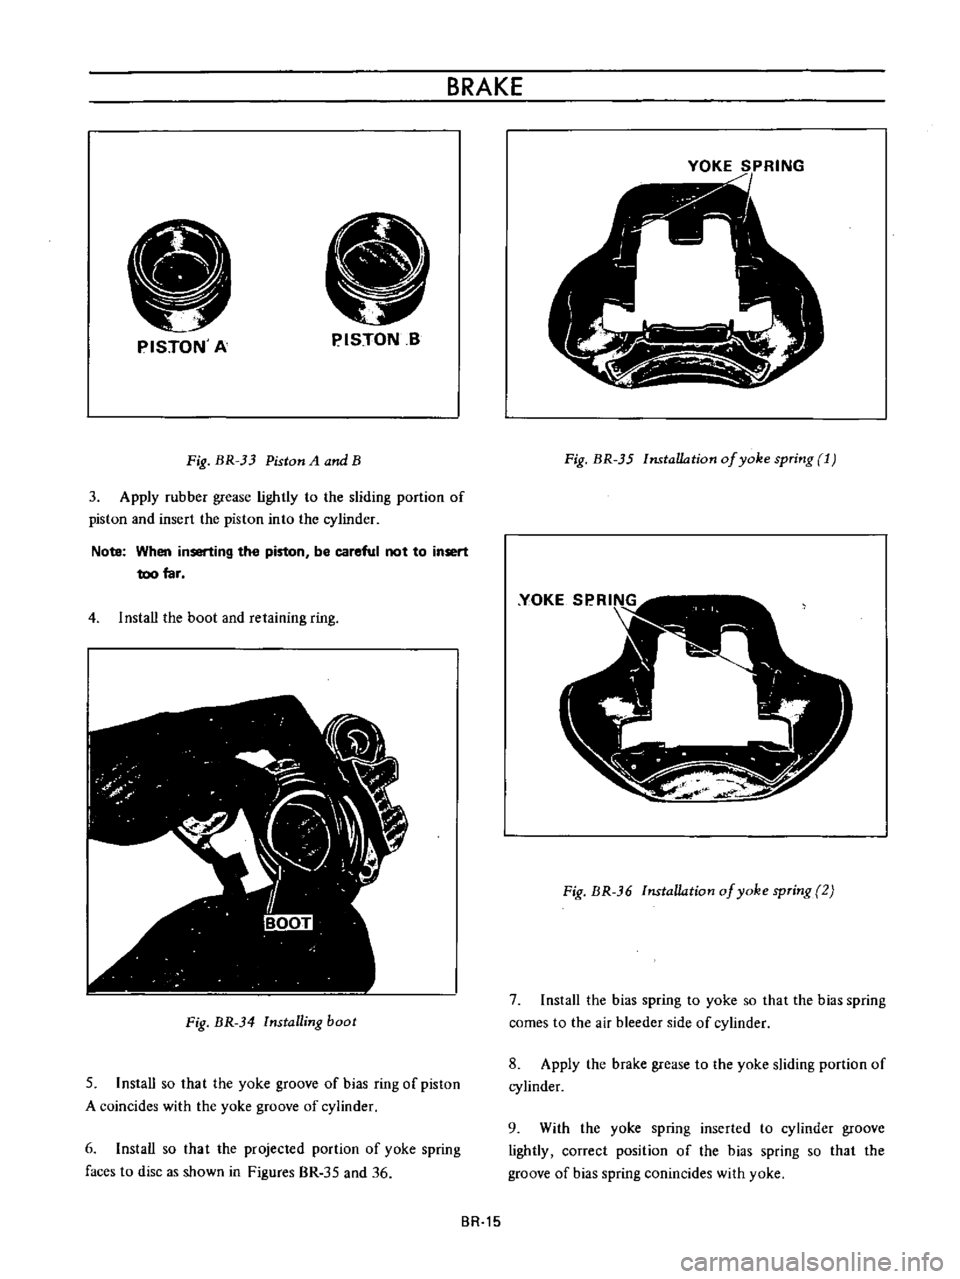 DATSUN B110 1973  Service Owners Manual 
BRAKE

i 
f

F

PISTON 
A 
PISTON 
S

Fig 
BR 
33

Piston 
A 
and 
B

3

Apply 
rubber

grease 
lightly 
to 
the

sliding 
portion 
of

piston 
and 
insert 
the

piston 
into 
the

cylinder

Note 
Wh